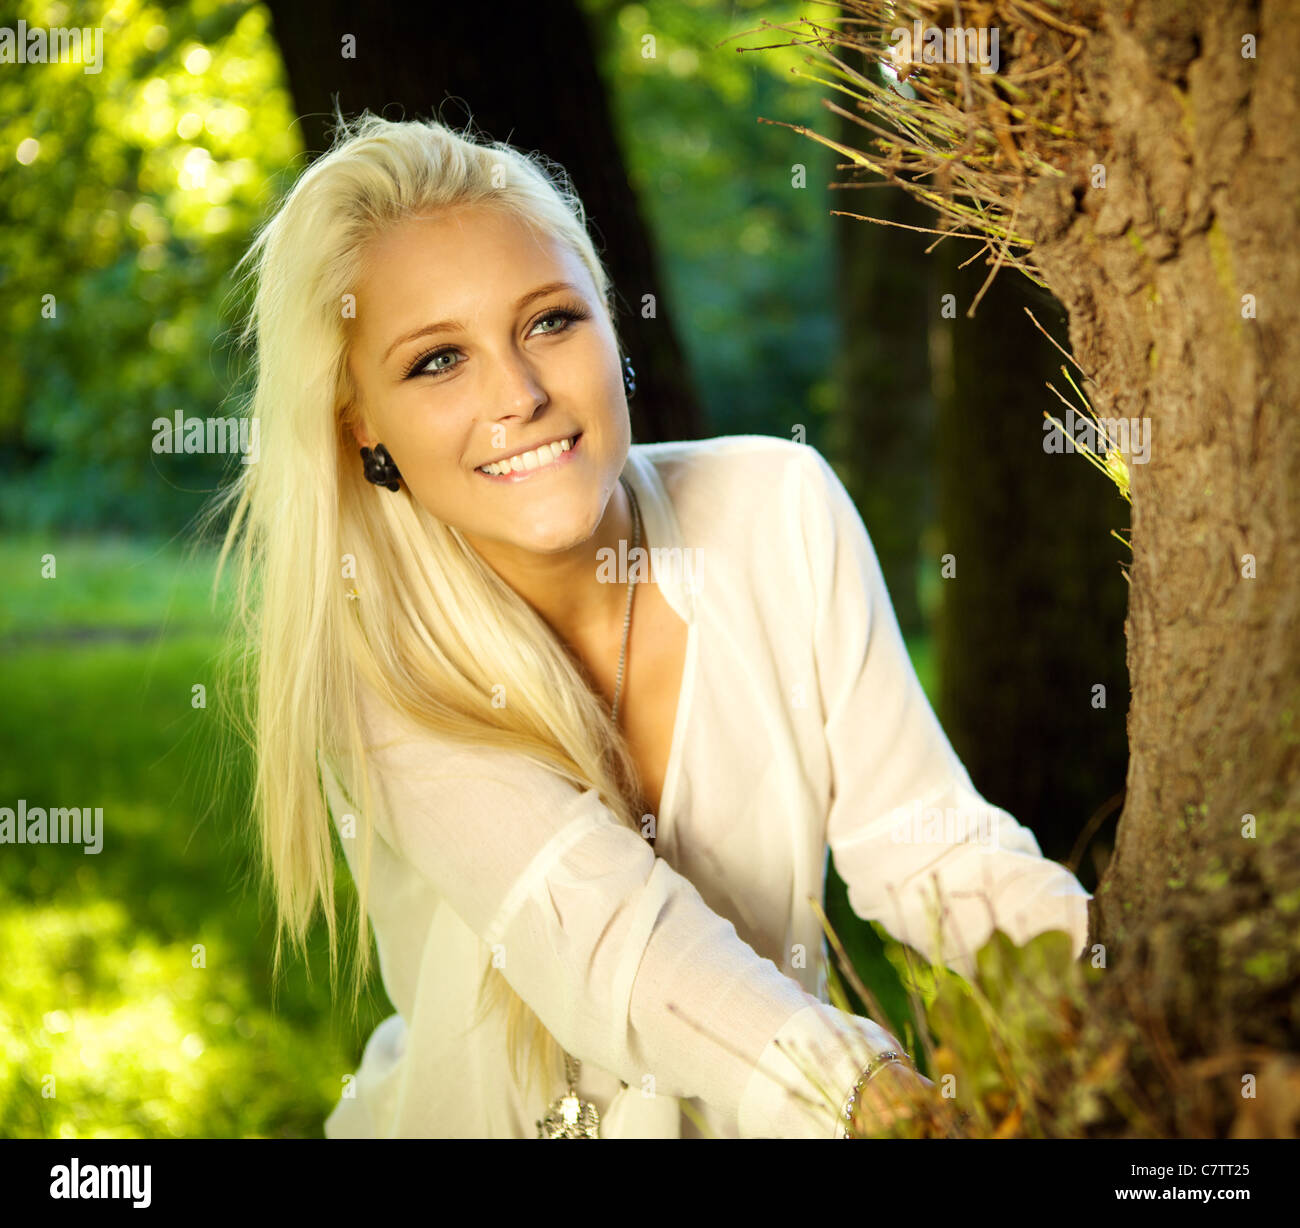 Pretty woman playing hide and seek in a park - looking out from behind a tree. Stock Photo